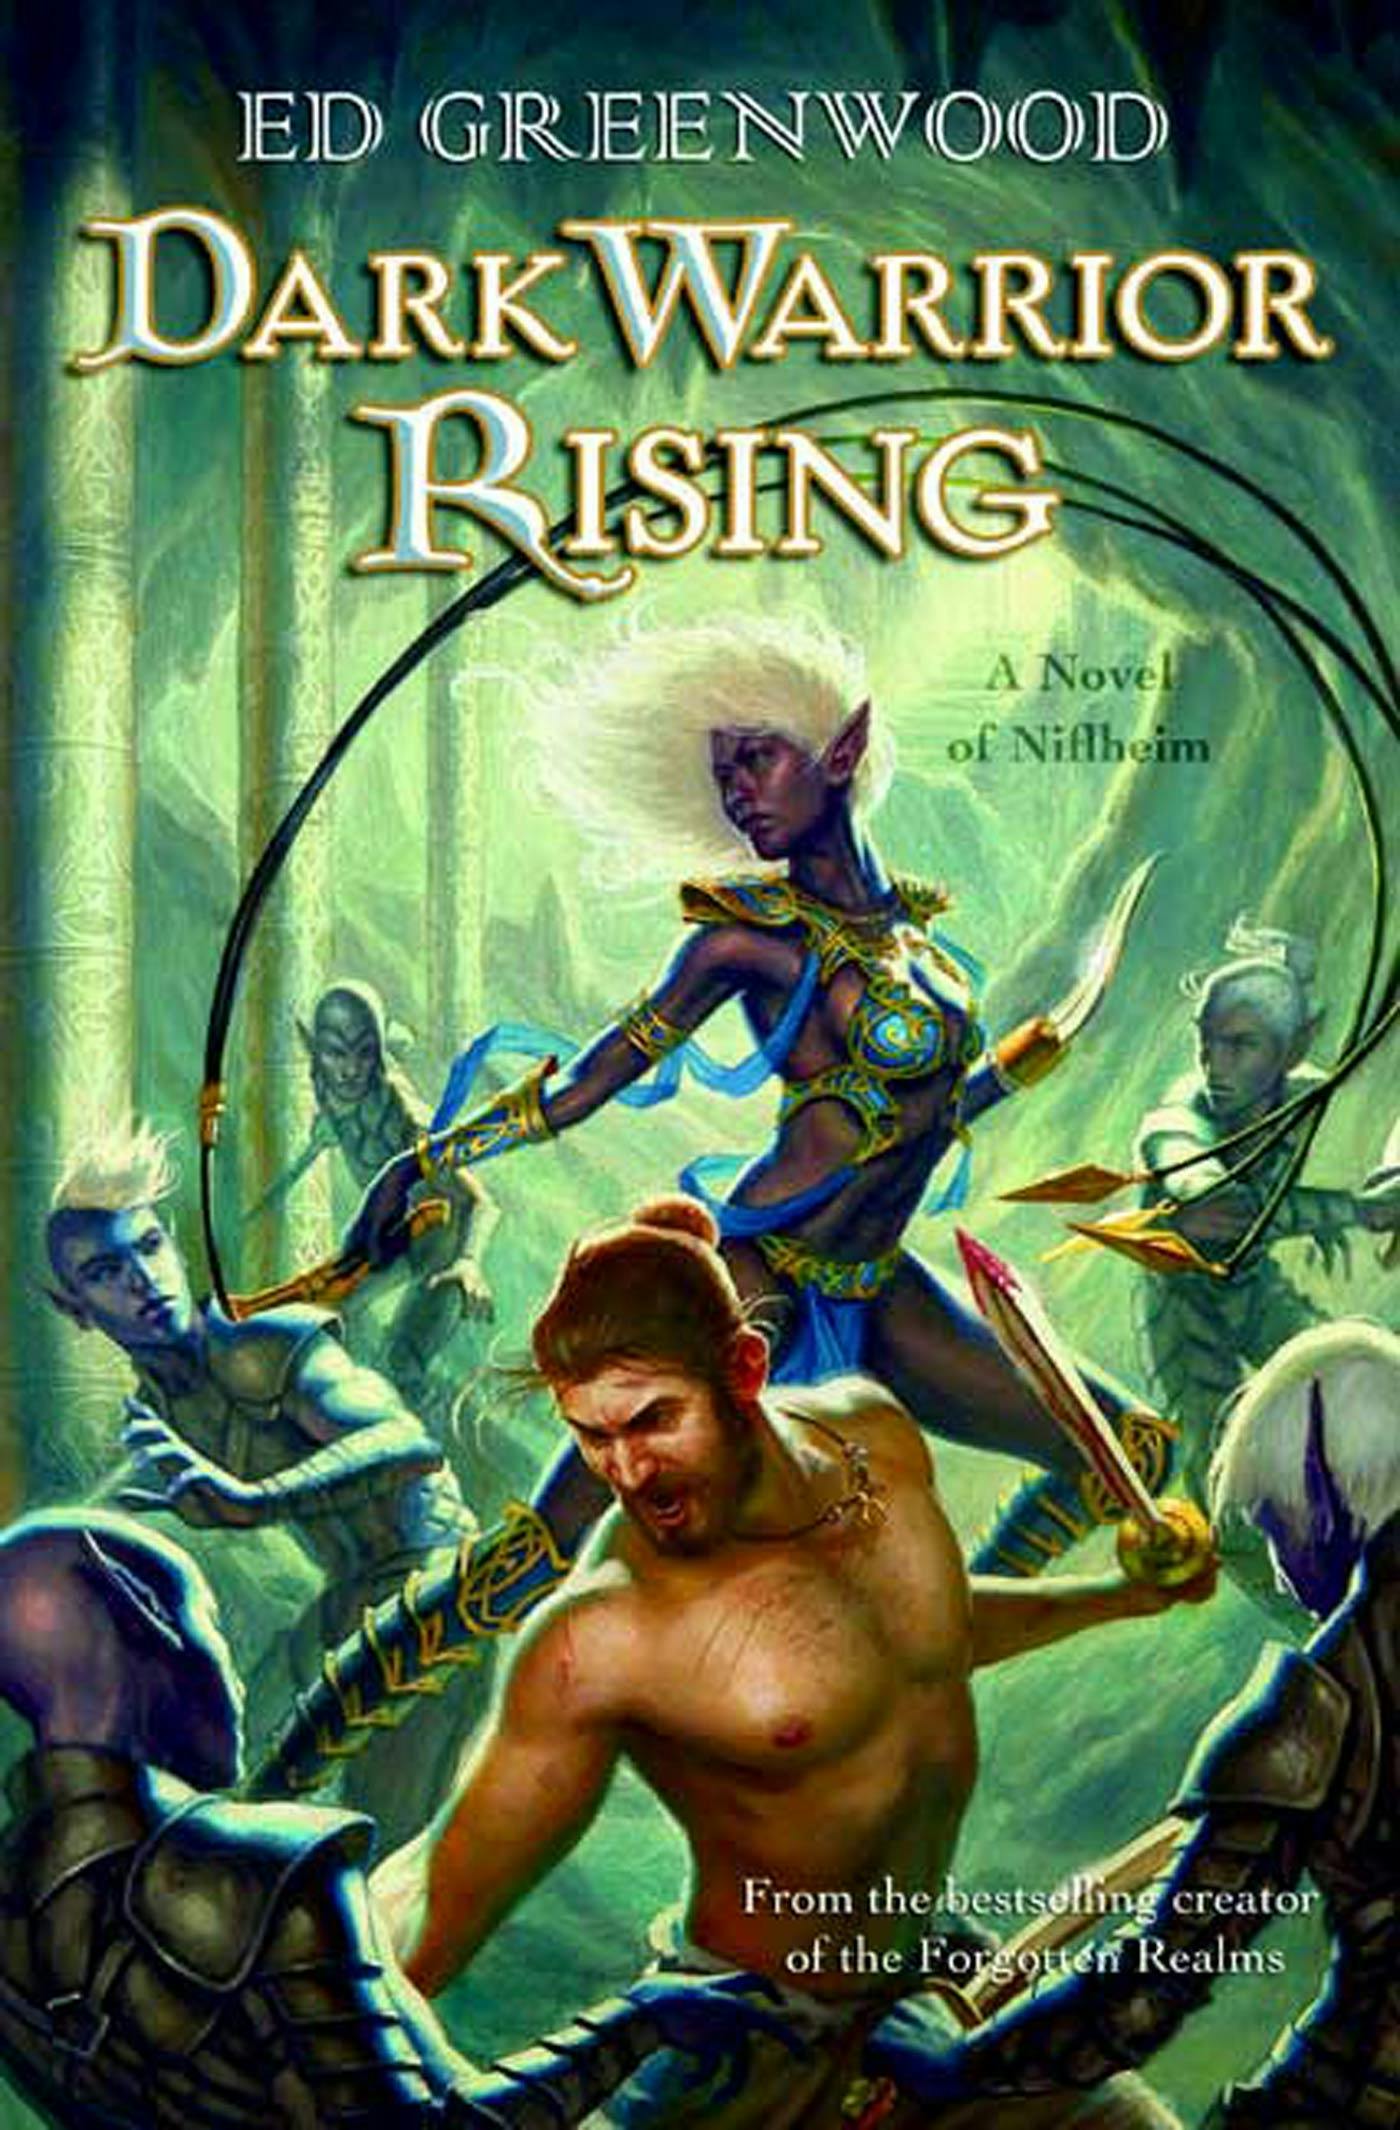 Cover for the book titled as: Dark Warrior Rising